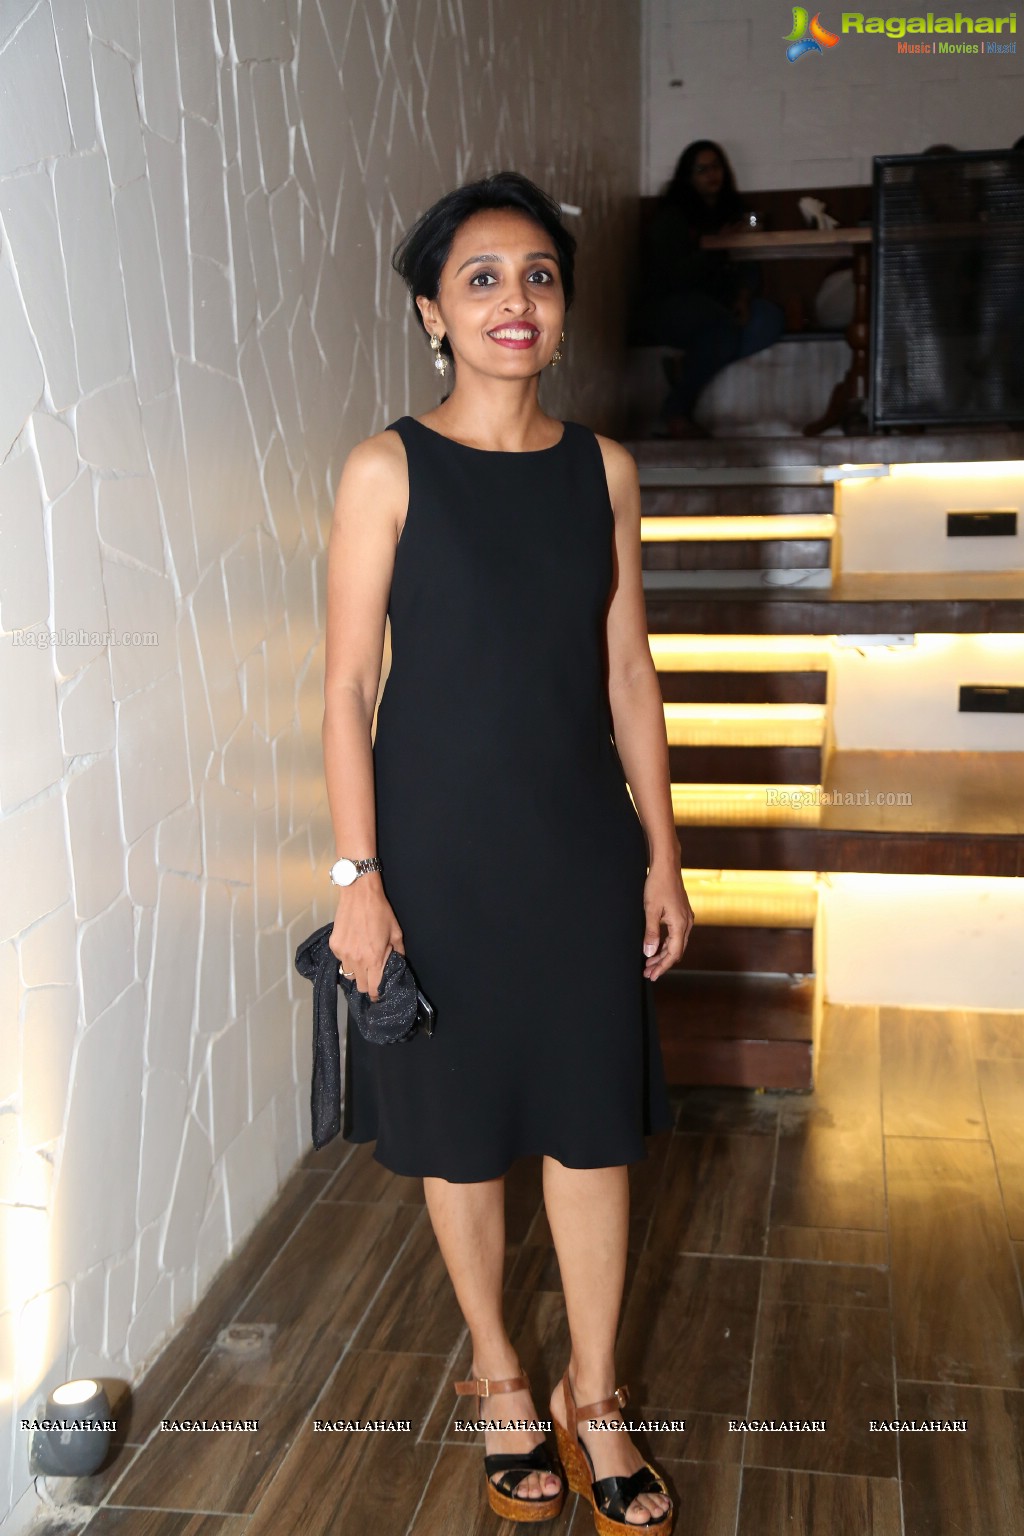 Grand Launch of Avenue Restro Grill Lounge, Jubilee Hills